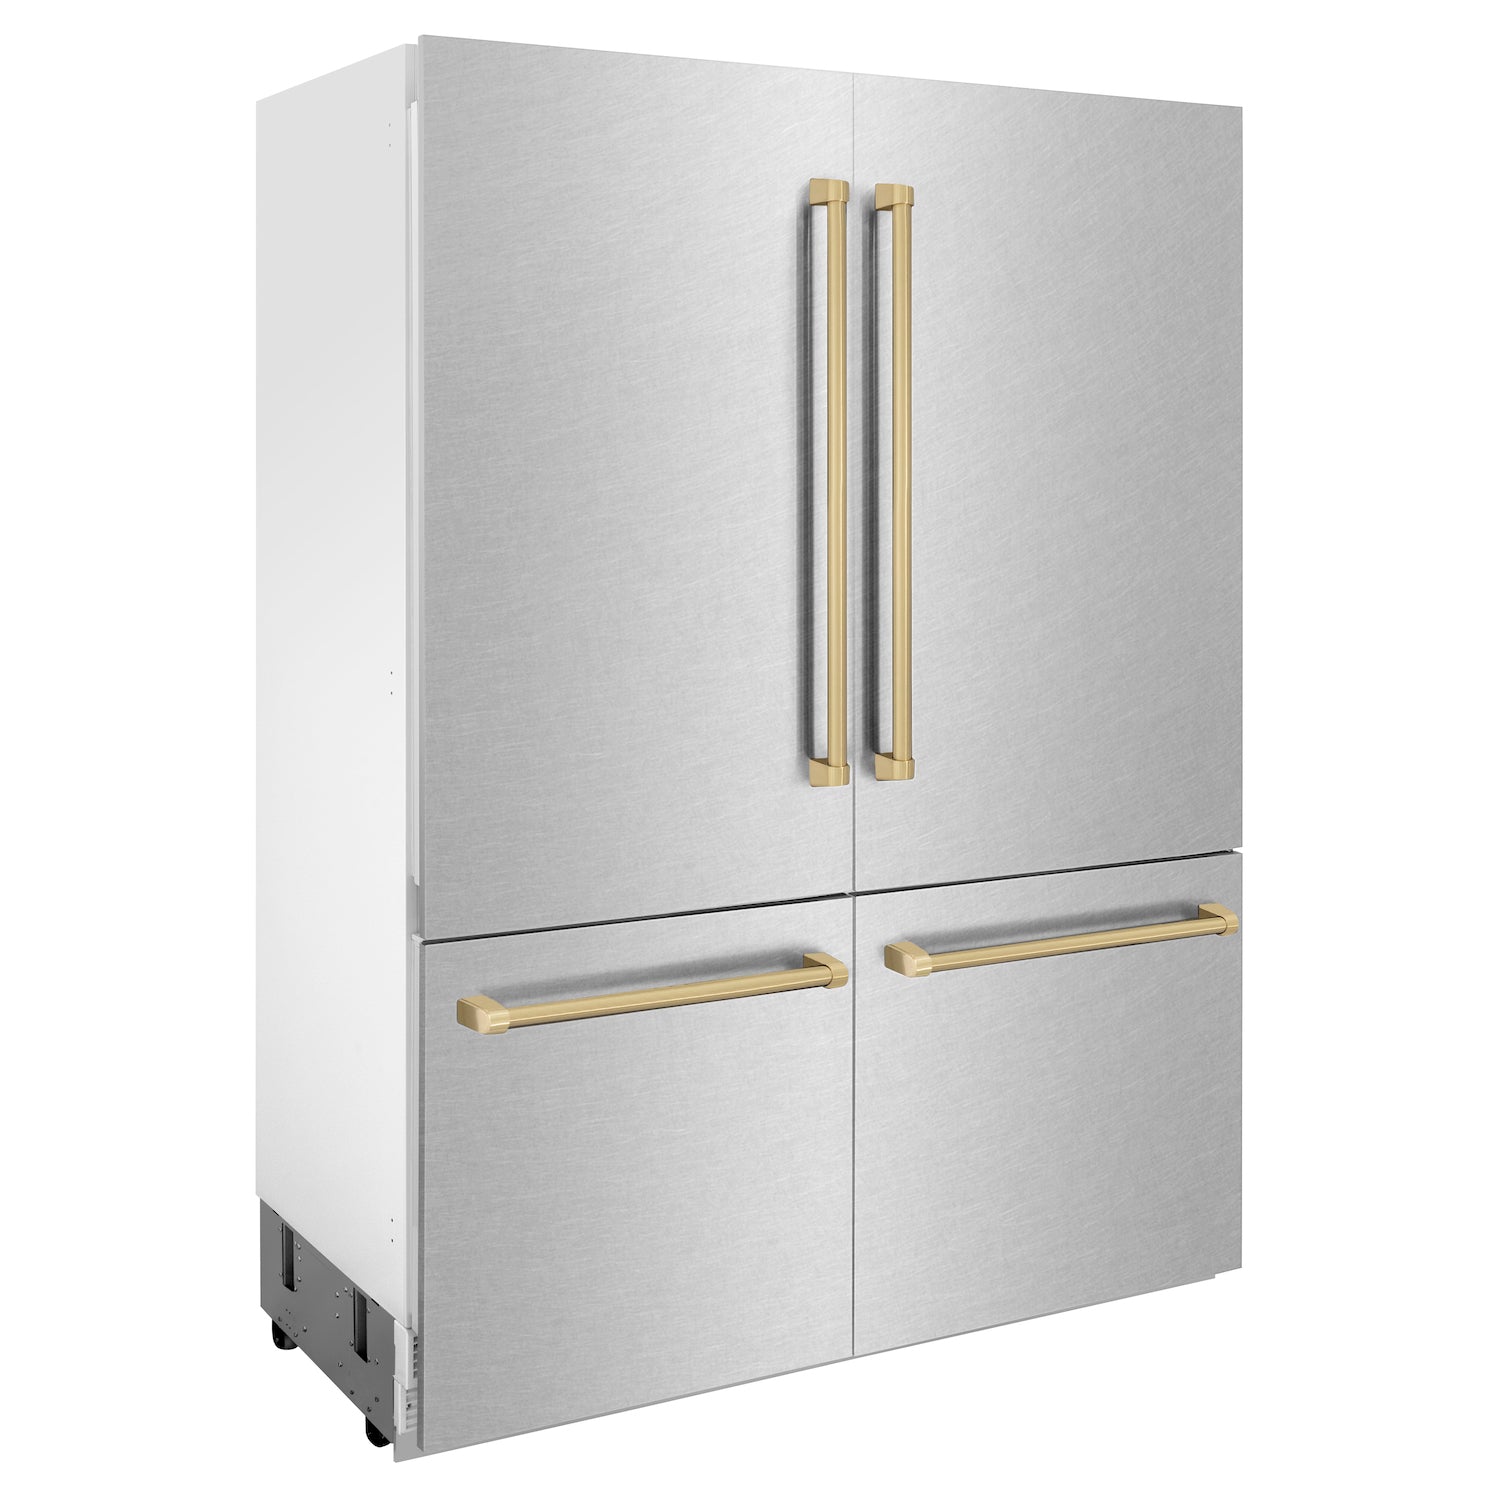 ZLINE 60" Autograph Edition 32.2 cu. ft. Built-in 4-Door French Door Refrigerator with Internal Water and Ice Dispenser in Fingerprint Resistant Stainless Steel with Champagne Bronze Accents (RBIVZ-SN-60-CB)